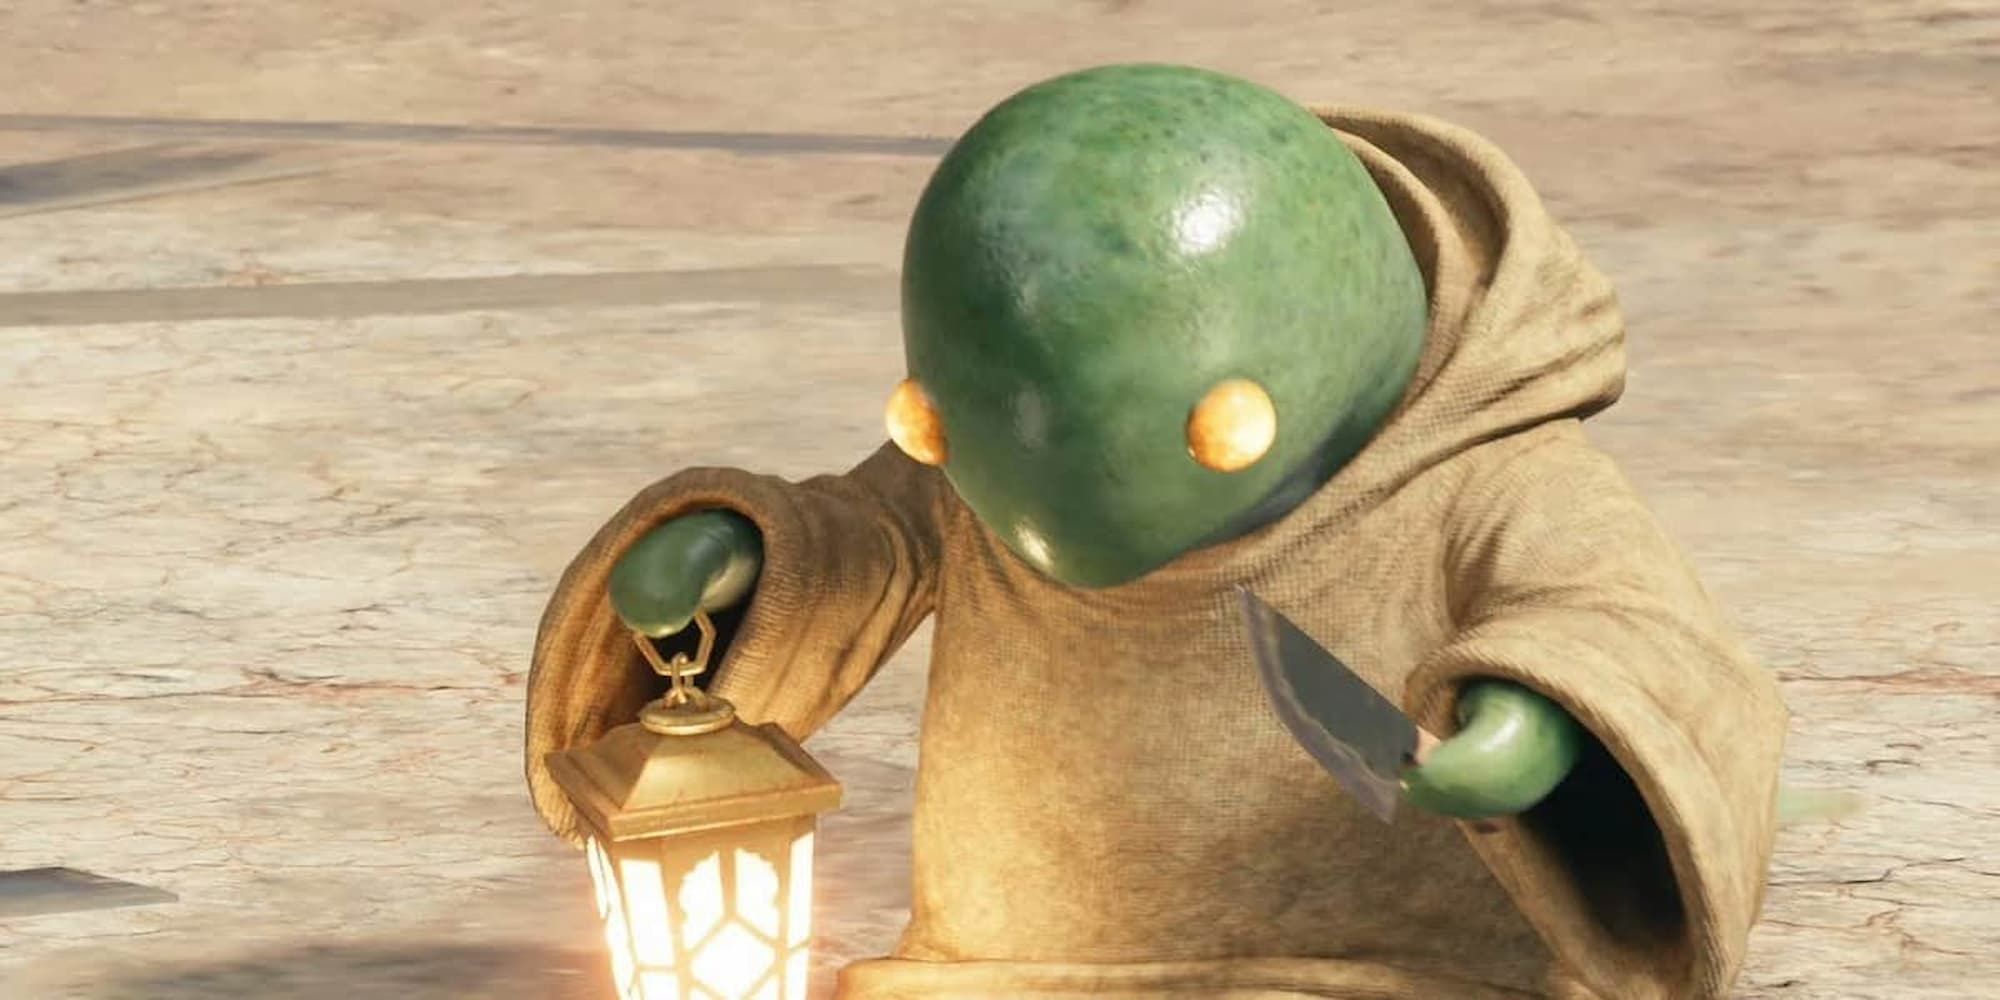 final fantasy 7 remake small green tonberry small beady yellow eyes wearing beige robe holding lantern and knife